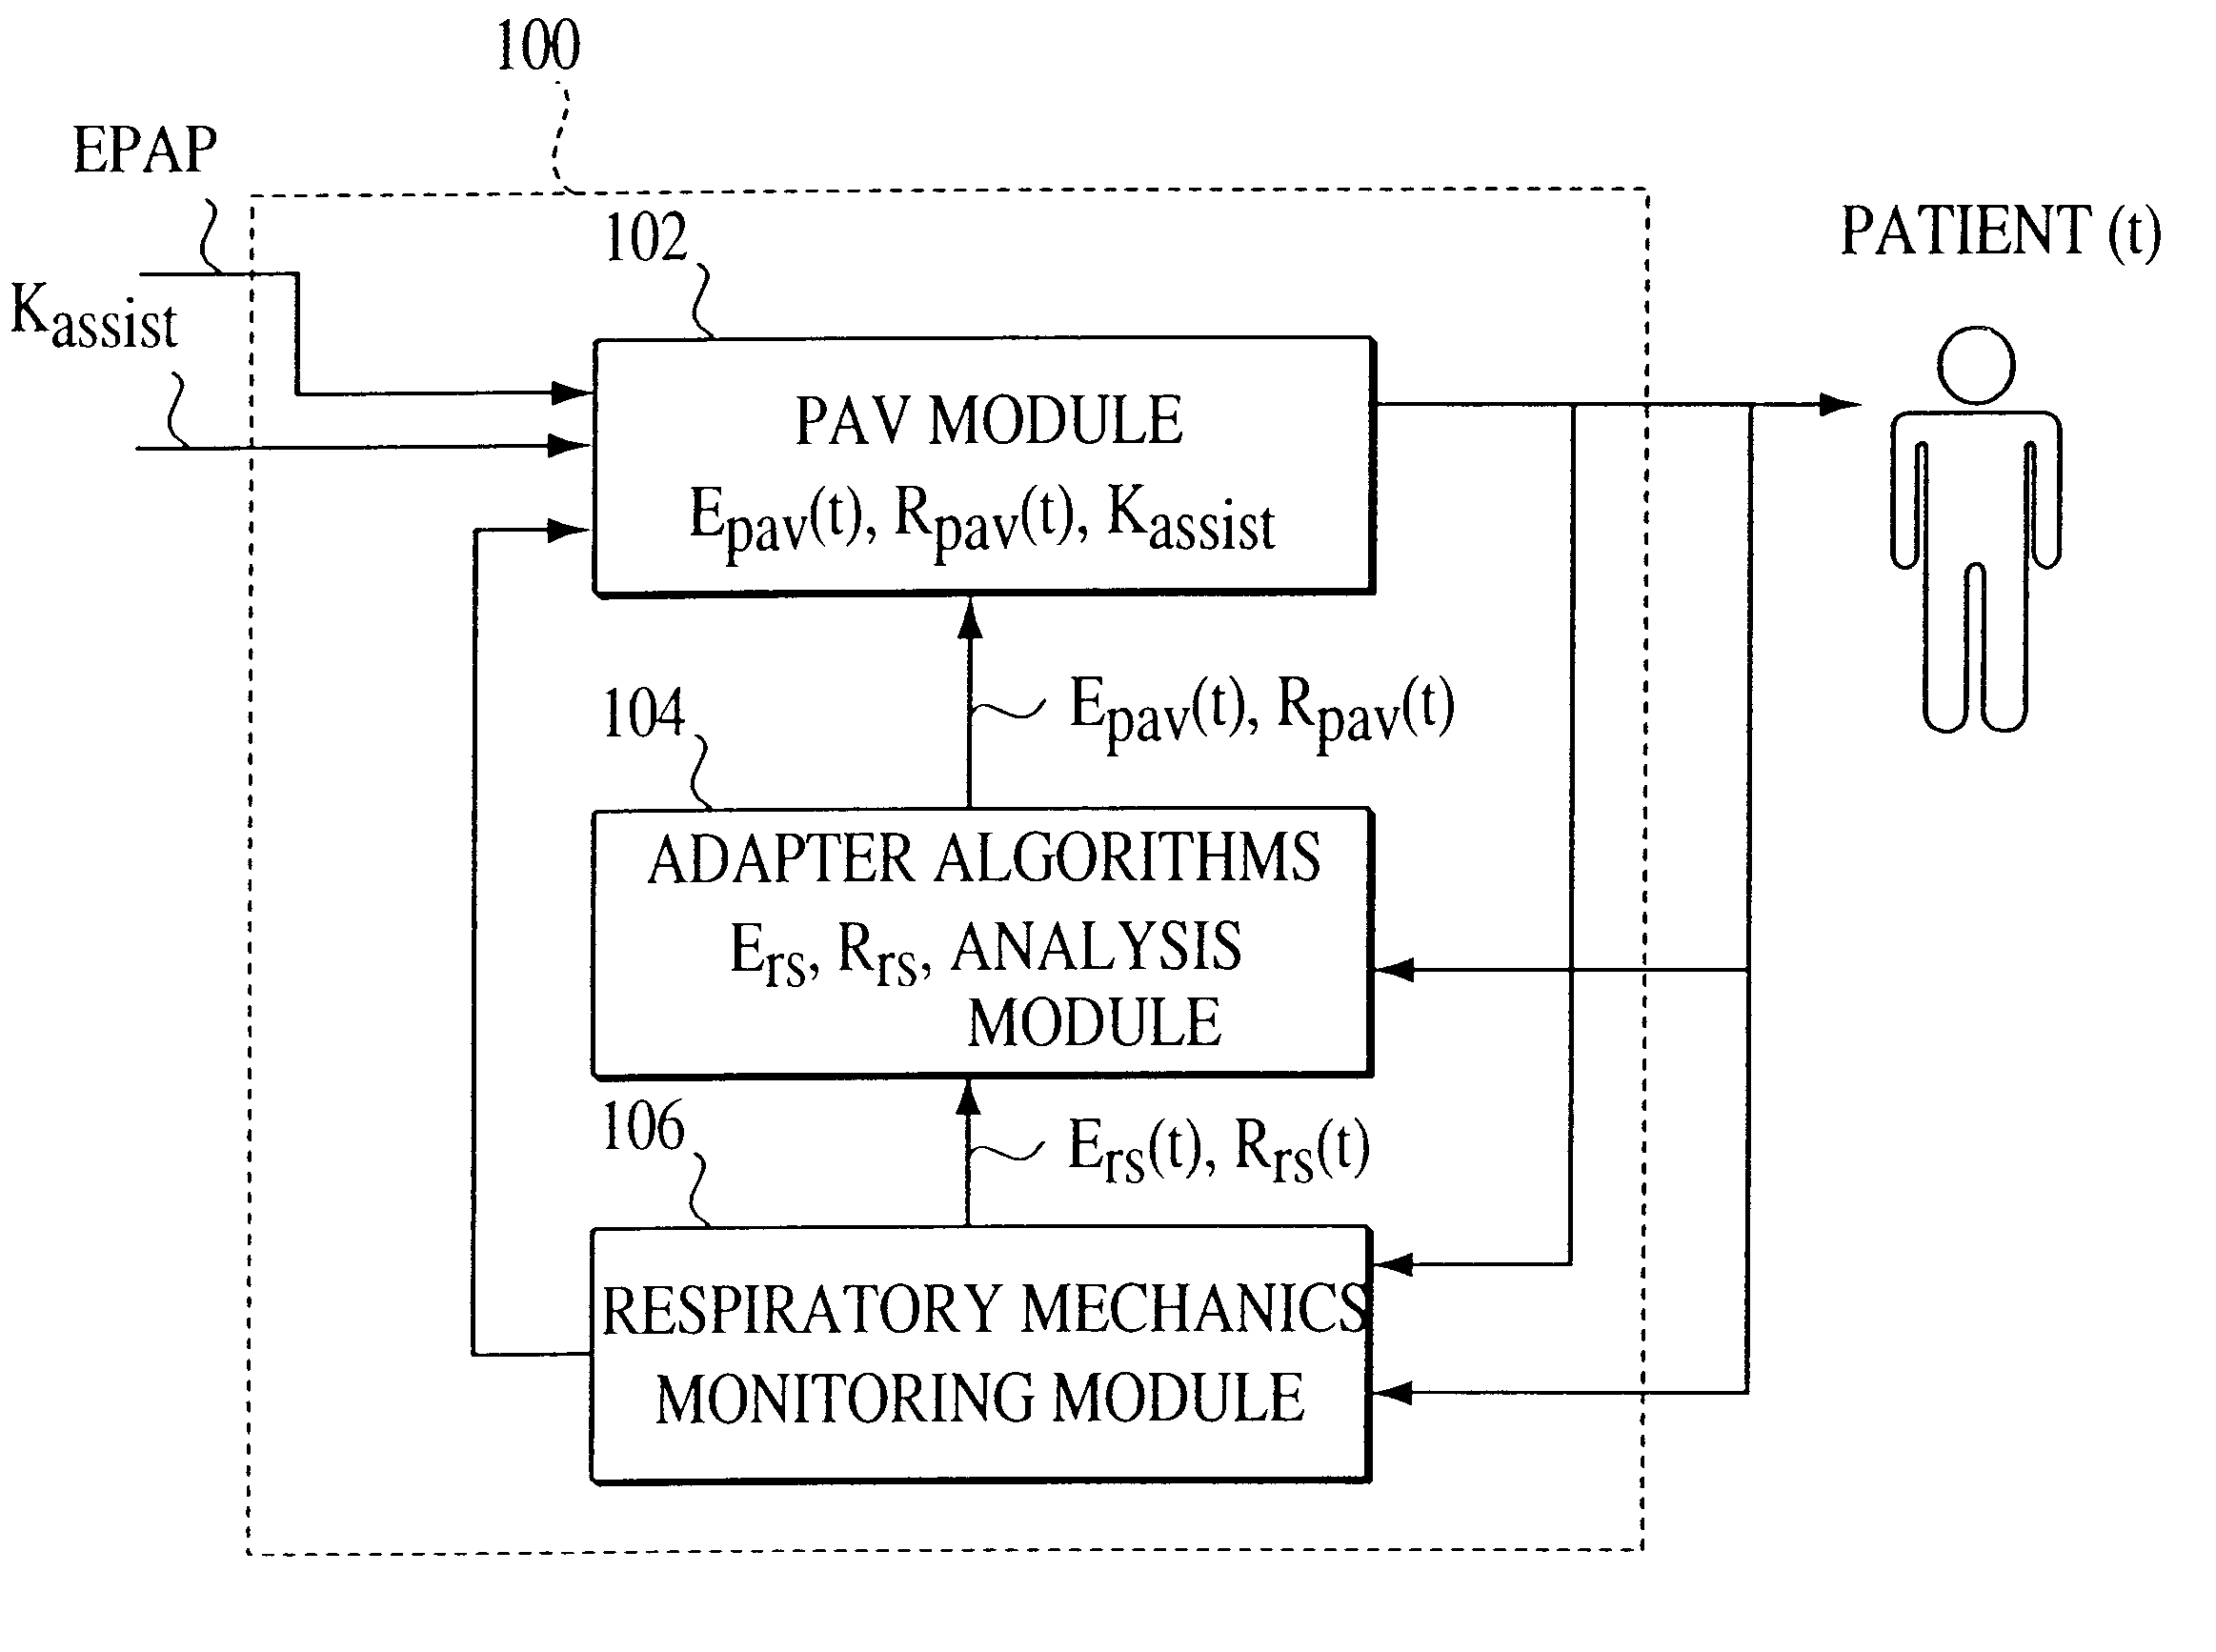 Apparatus and method for determining respiratory mechanics of a patient and for controlling a ventilator based thereon